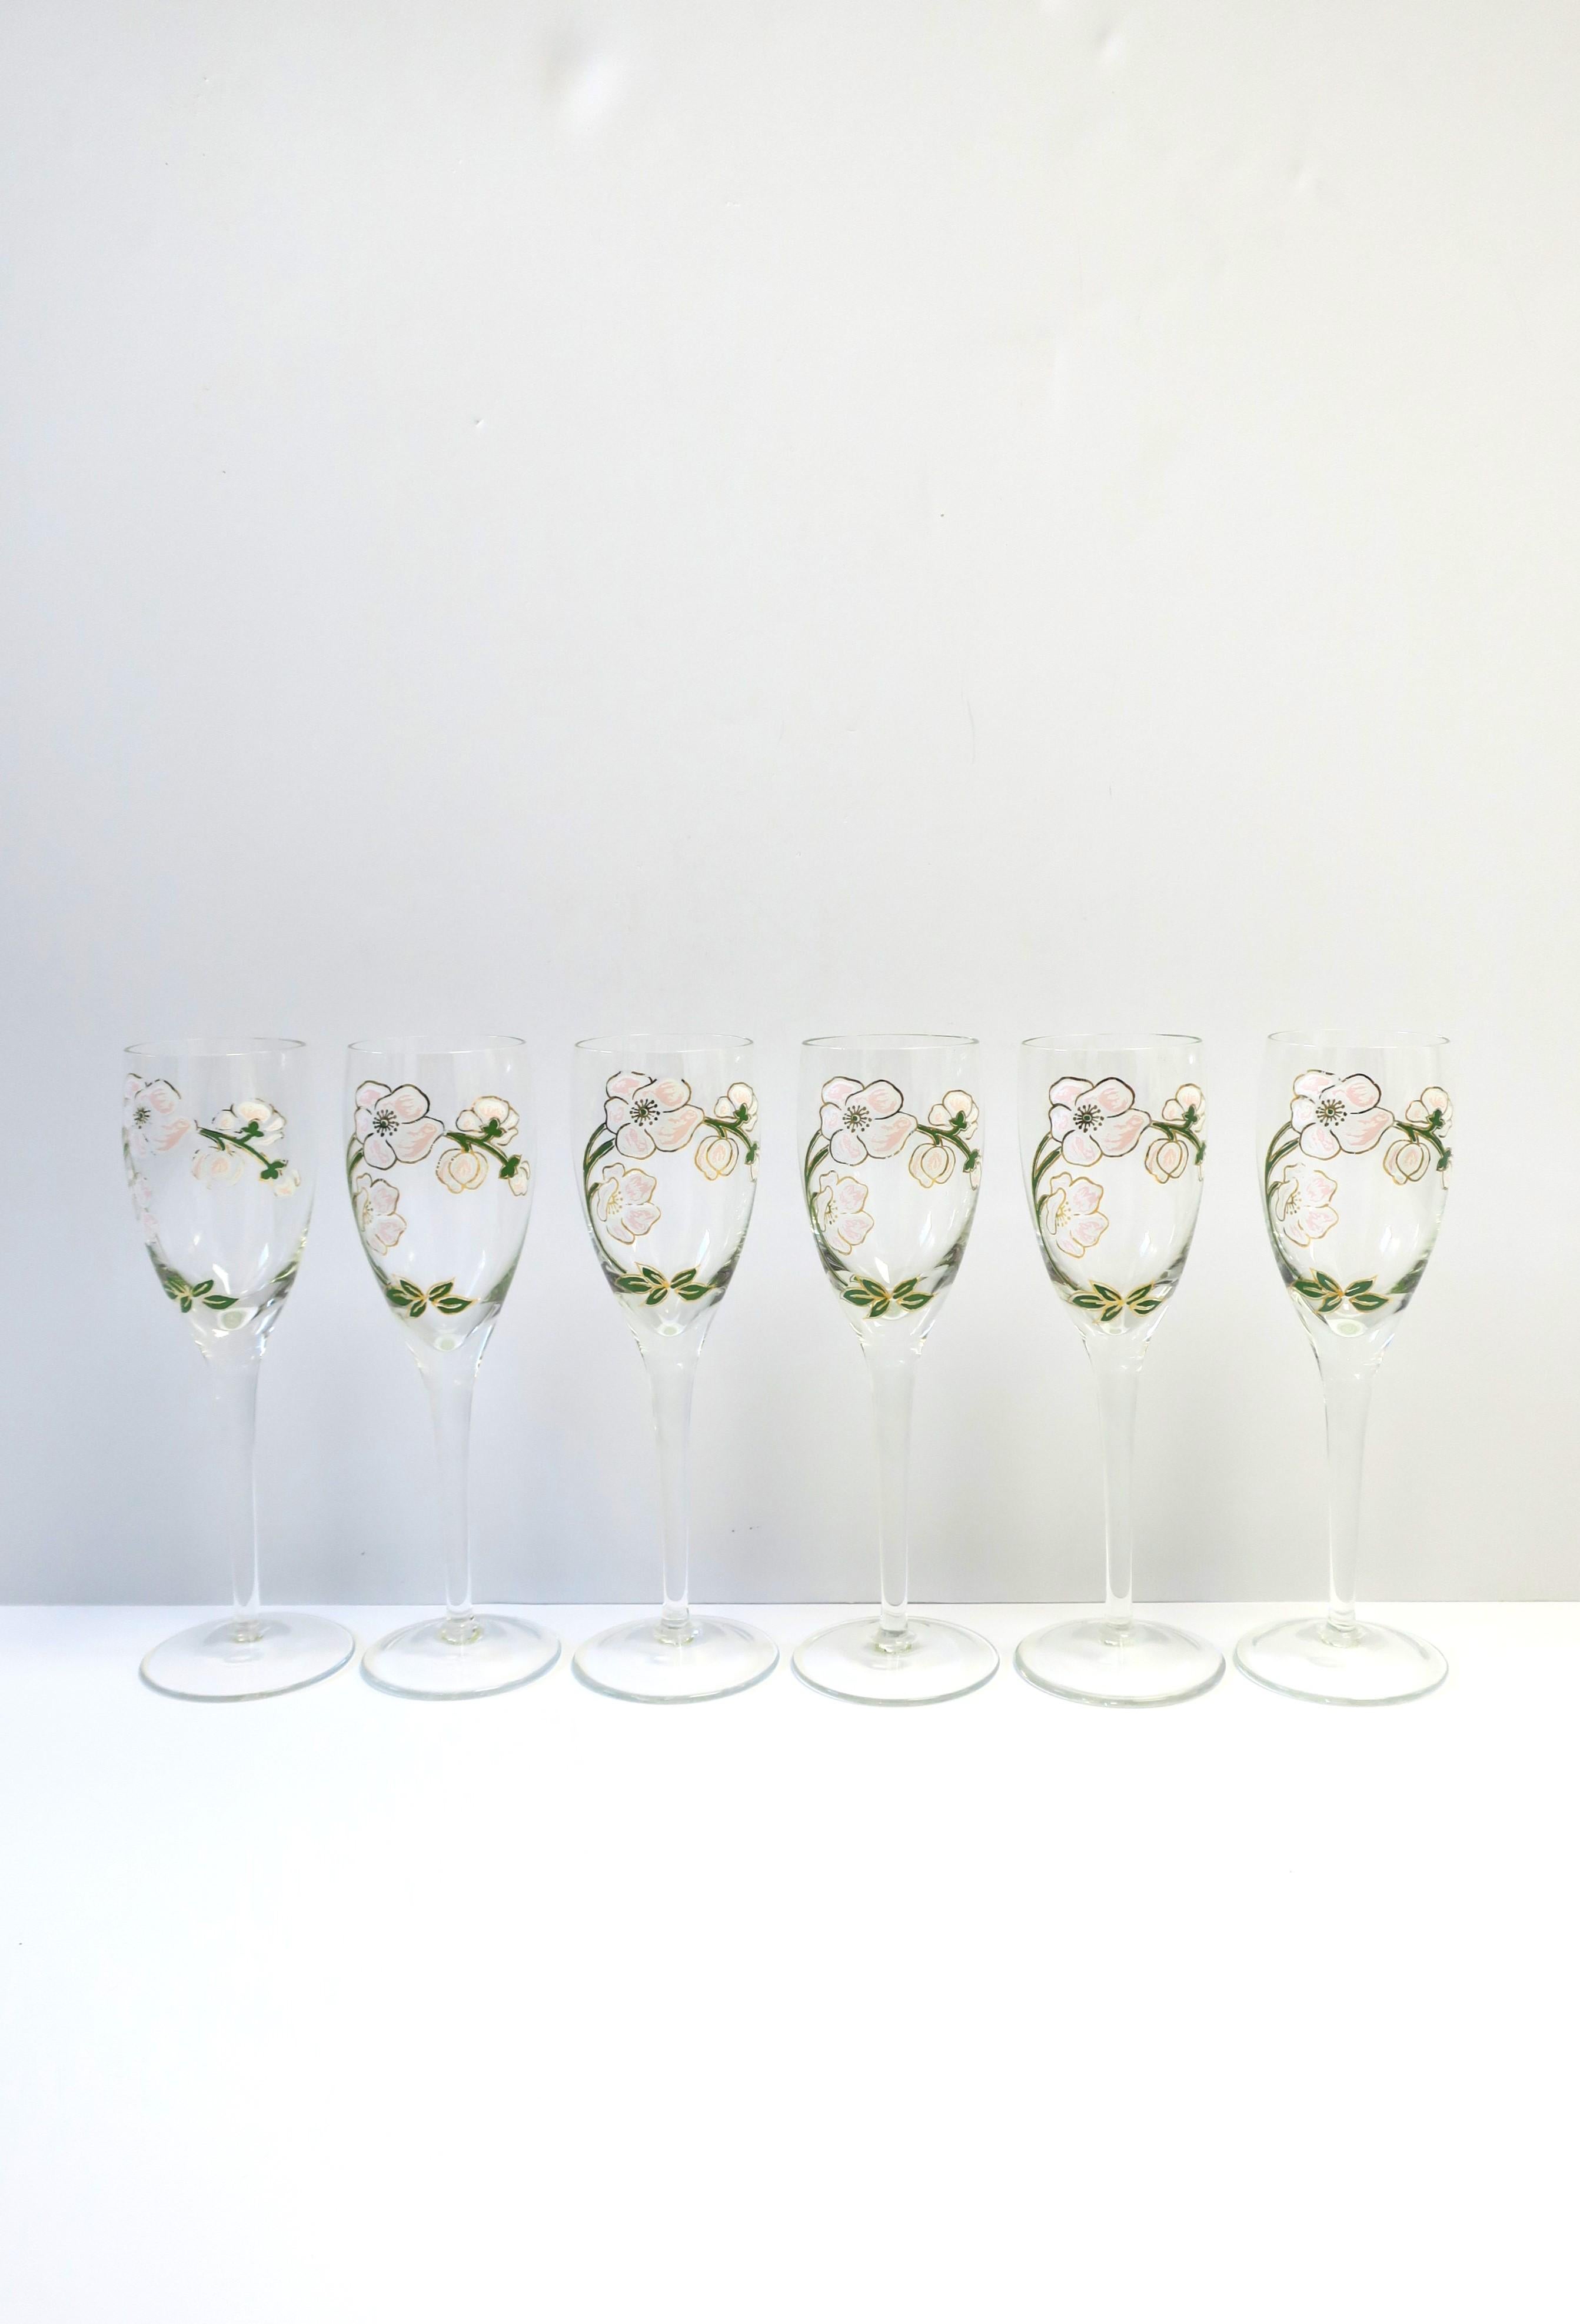 A beautiful set of six (6) vintage Perrier-Jouet French champagne flute glasses with iconic floral motif in the Art Nouveau style, circa mid to late-20th century, France. This iconic floral design of Japanese pink anemone flowers is from French